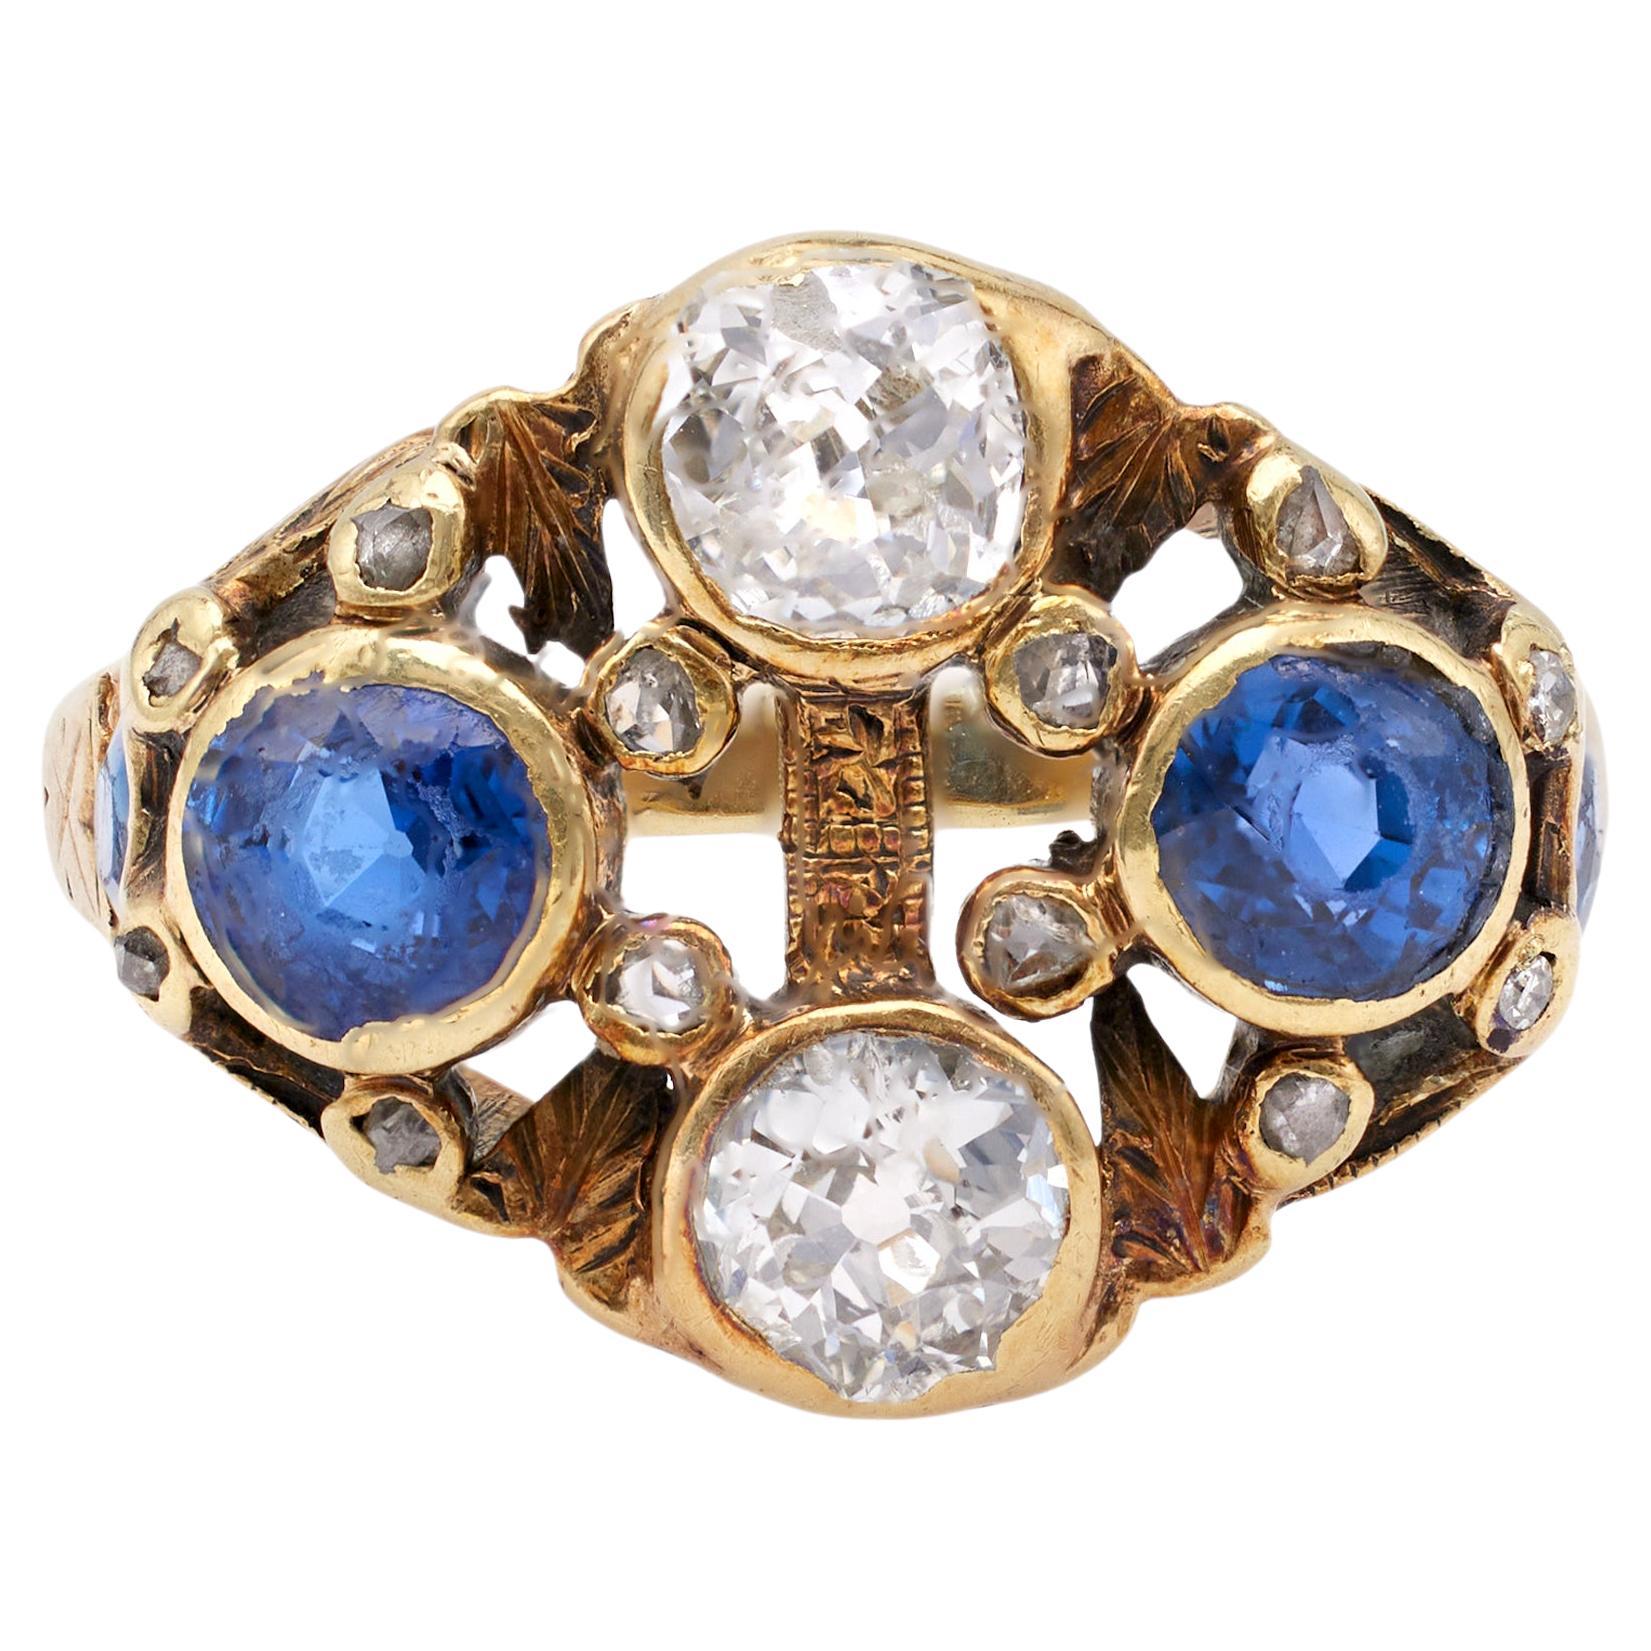 Antique French Diamond and Synthetic Sapphire 14k Yellow Gold Ring